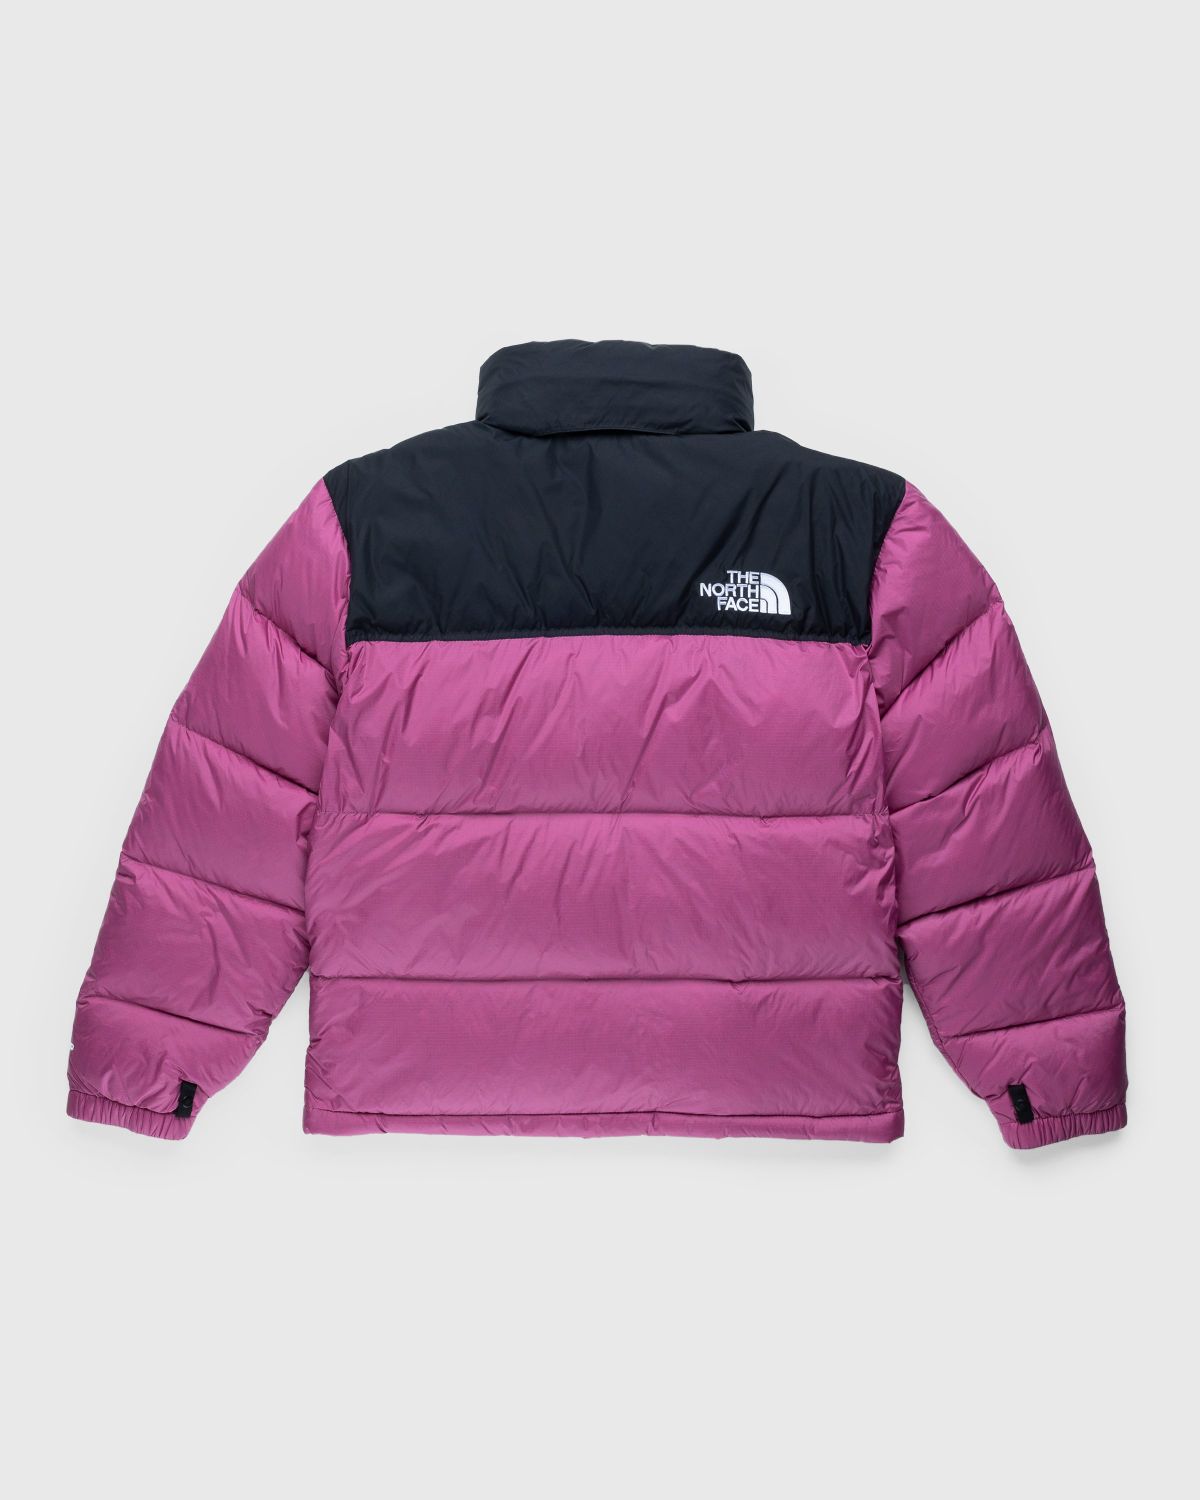 The North Face – 1996 Retro Nuptse Jacket Red - Outerwear - Red - Image 2